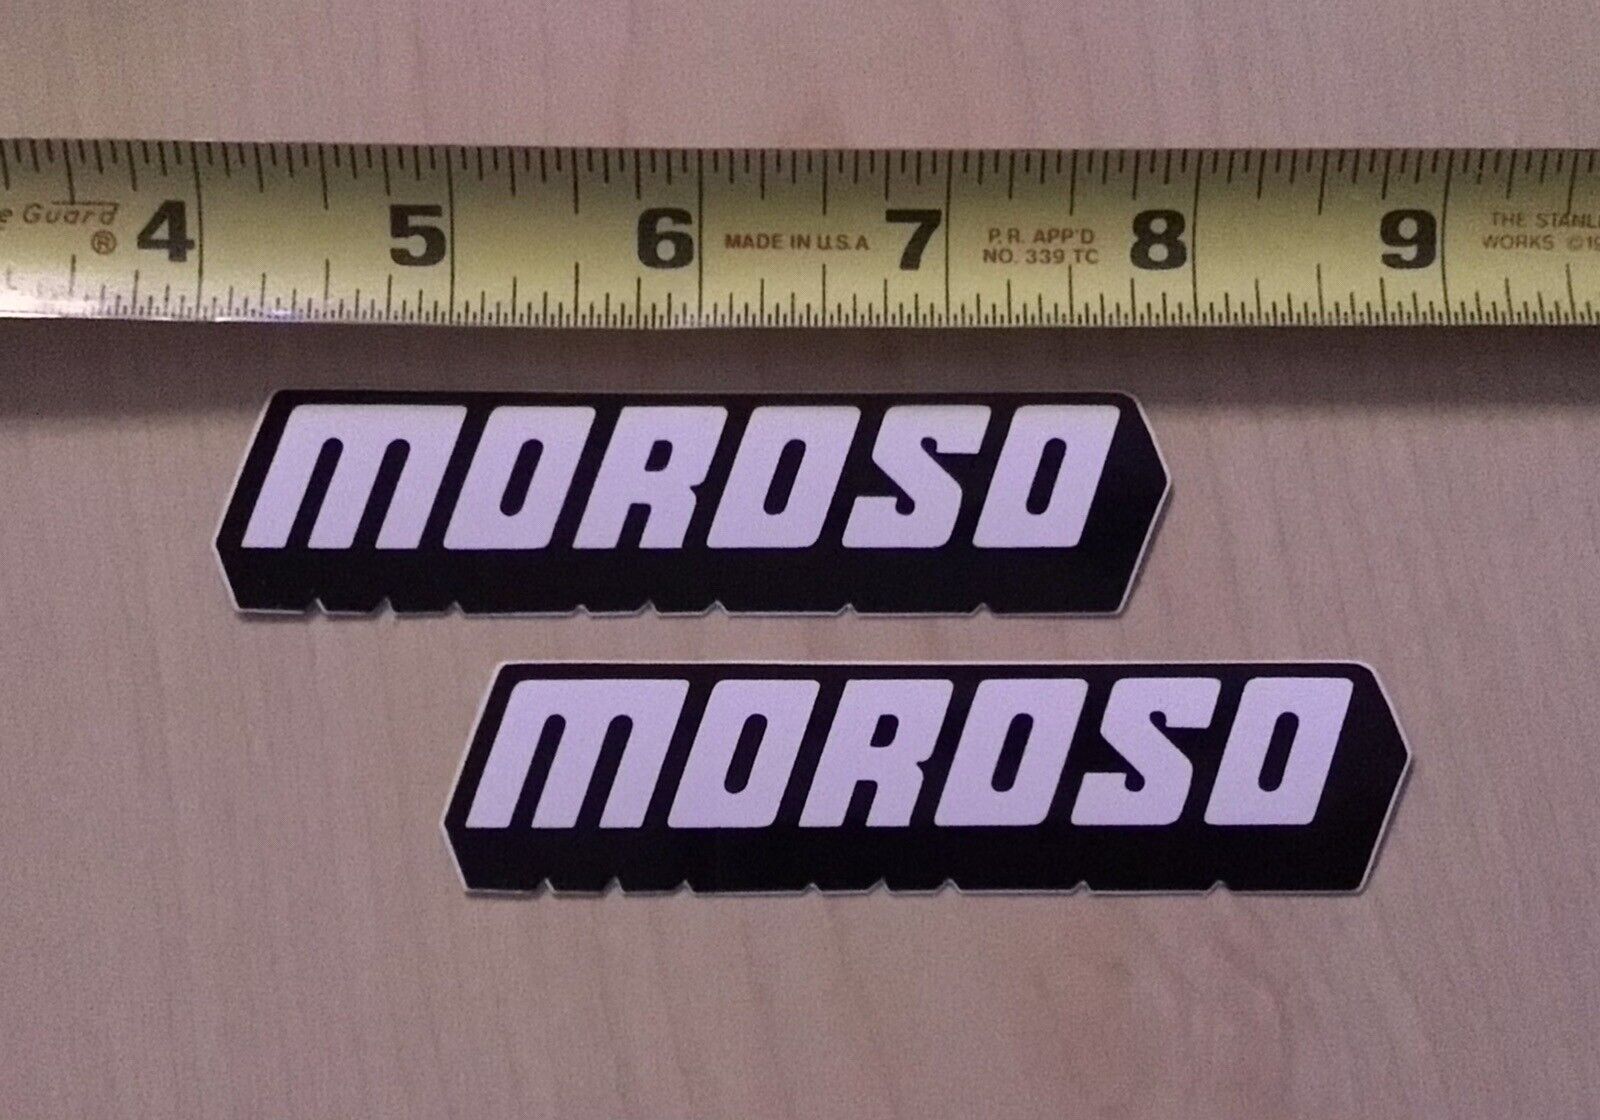 2 MOROSO real authentic original oil pan racing decals stickers 3 7/8 x 1 inch